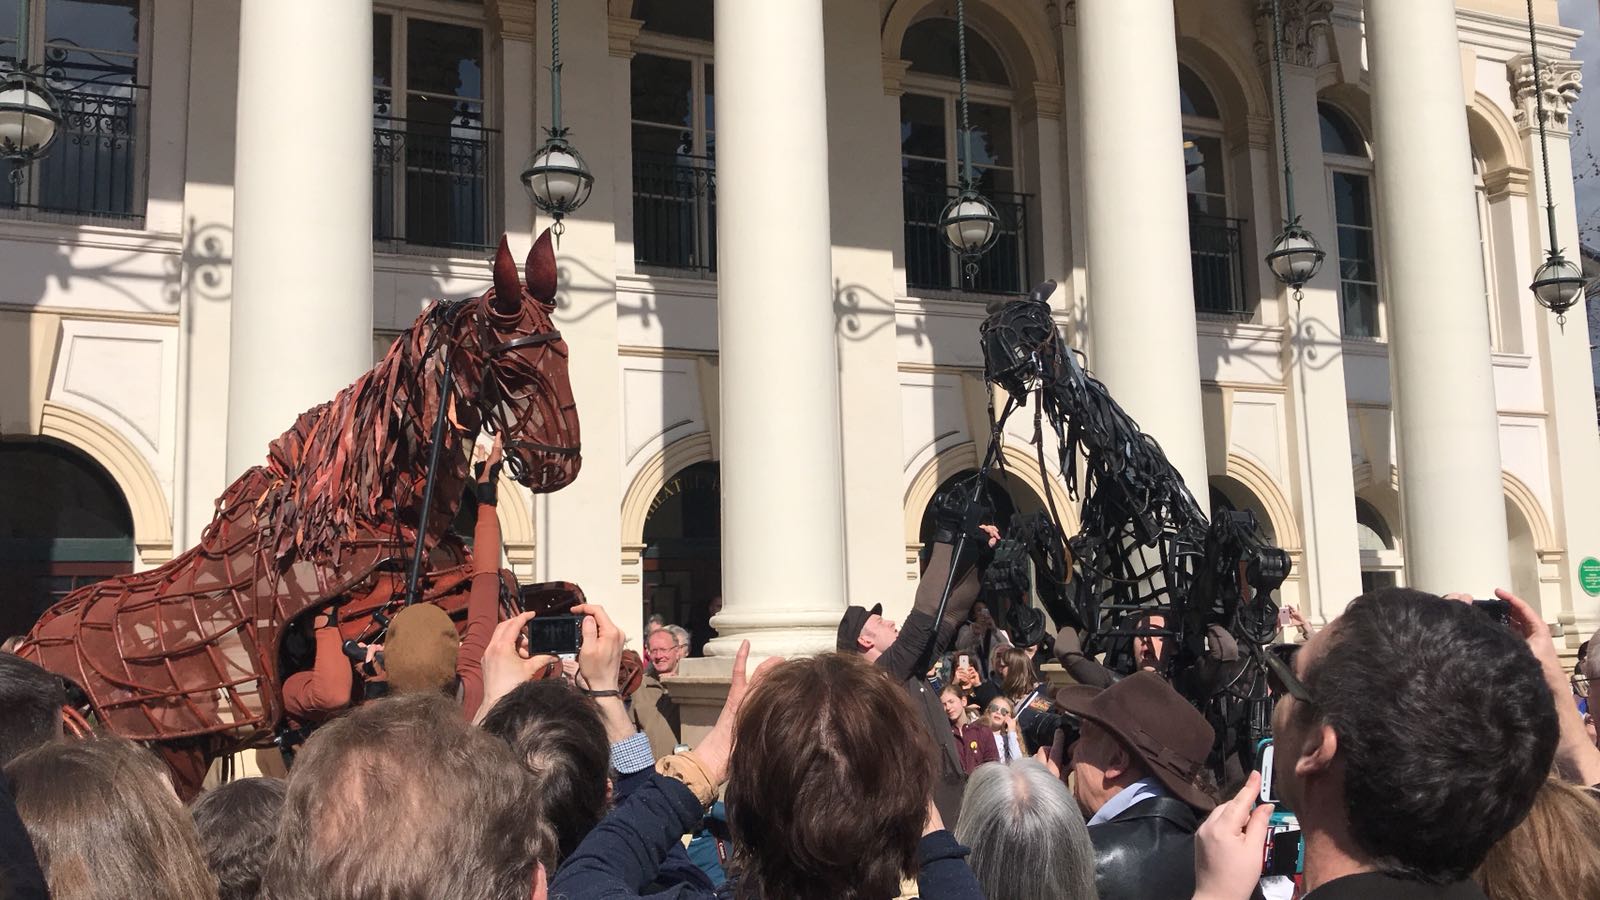 War Horse and Topthorn are really enjoying the parade this afternoon! Have you seen them yet?